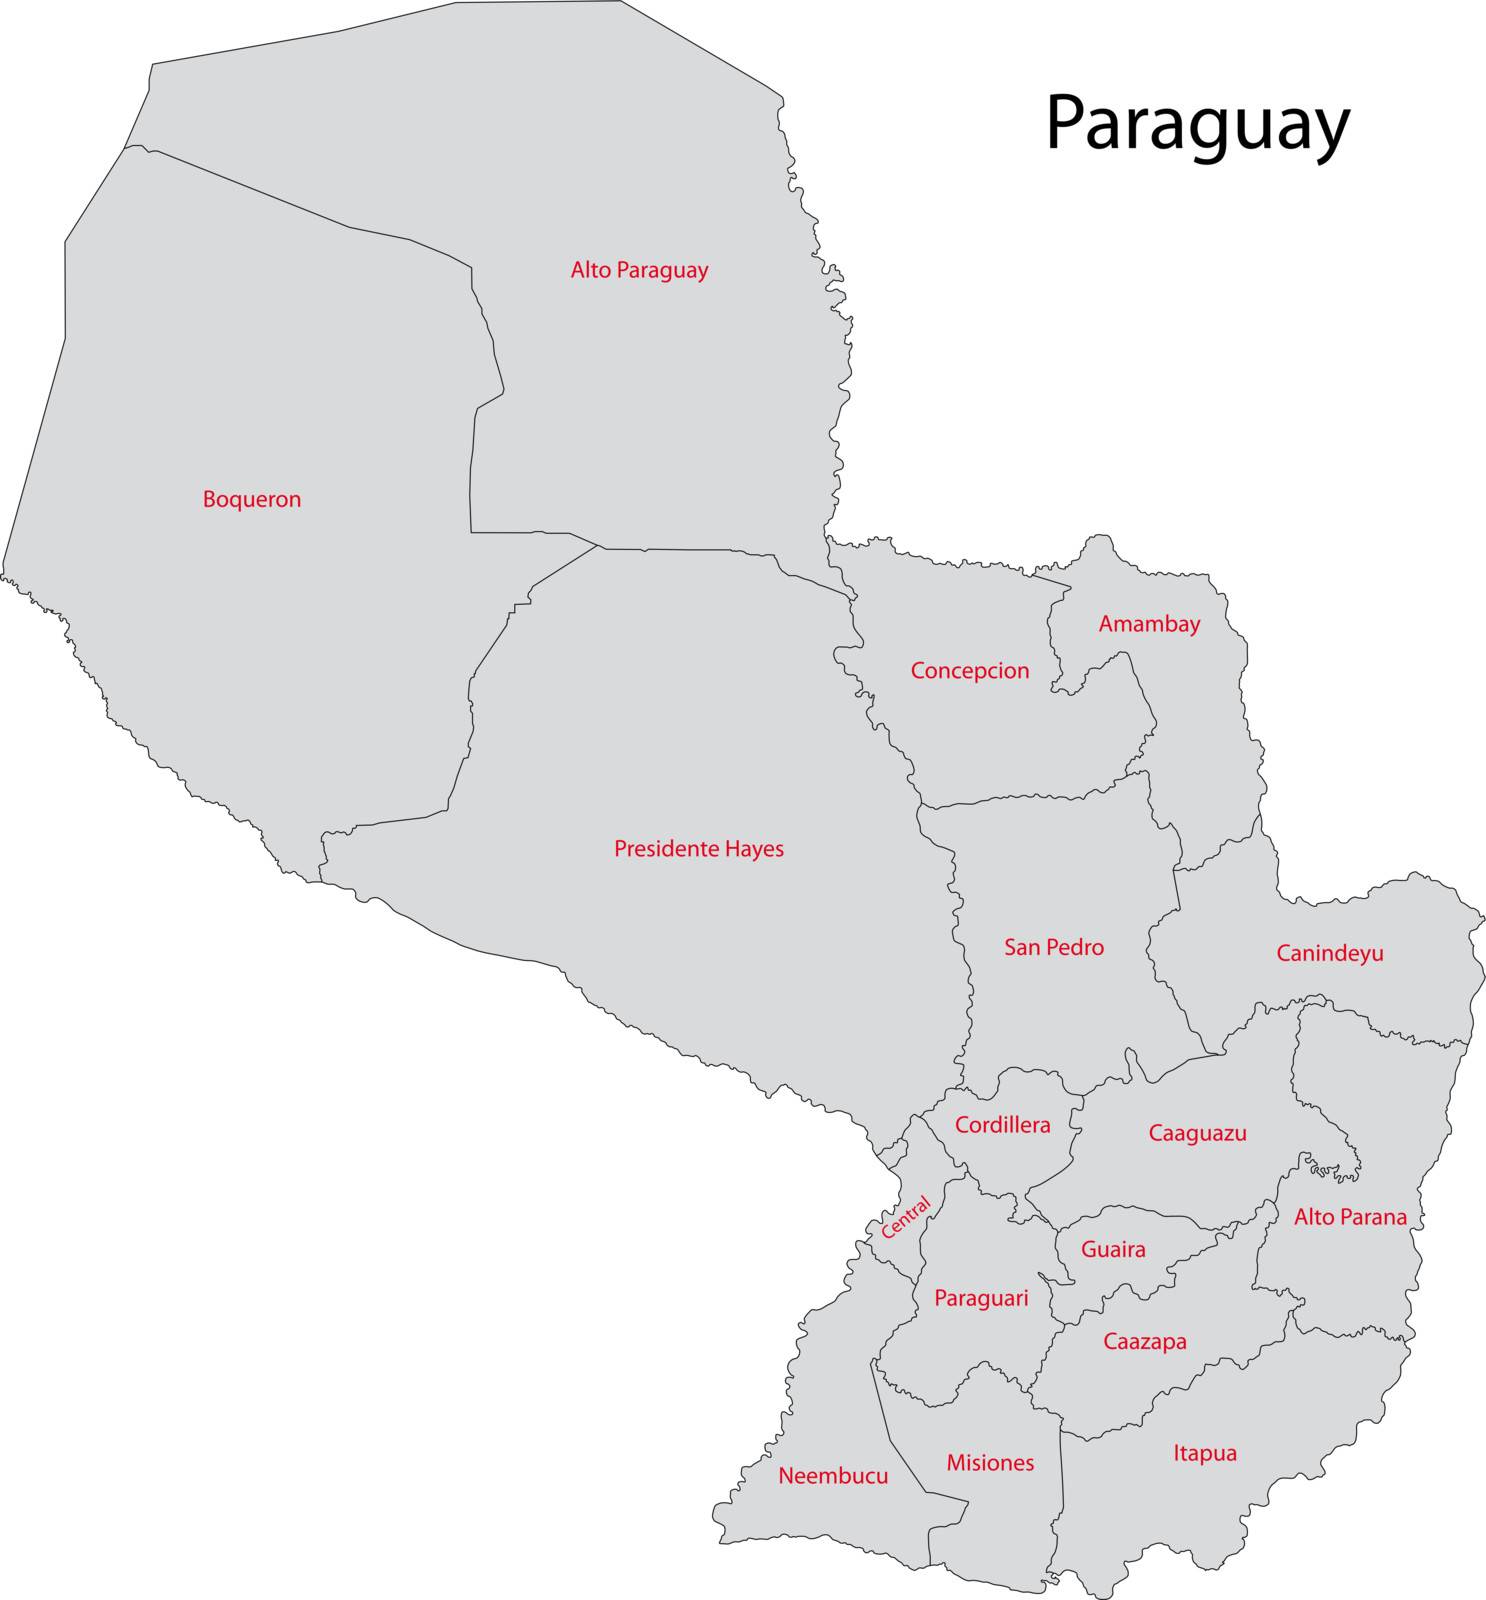 Gray Paraguay map by Volina